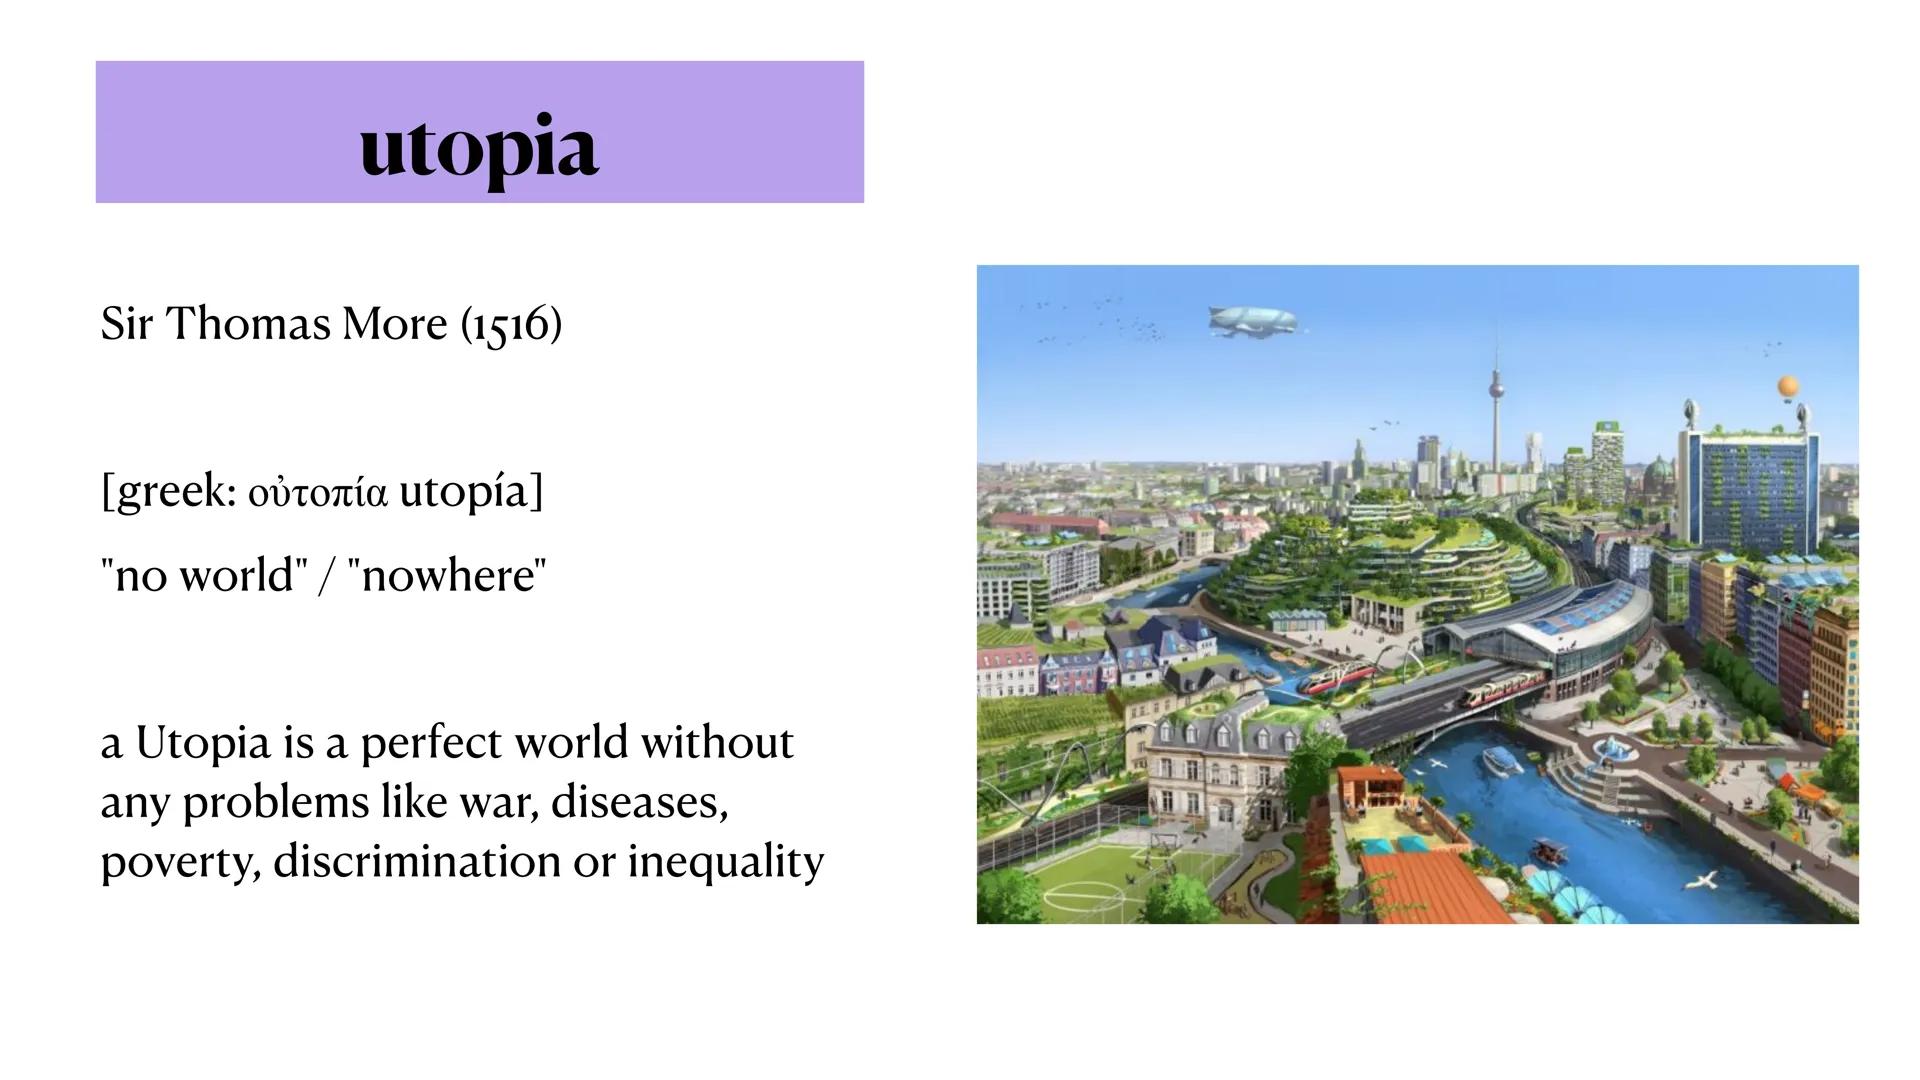 
<h2 id="introduction">Introduction</h2>
<p>The term "utopia" consists of two Greek words which can either mean "nowhere" or "no world." Its